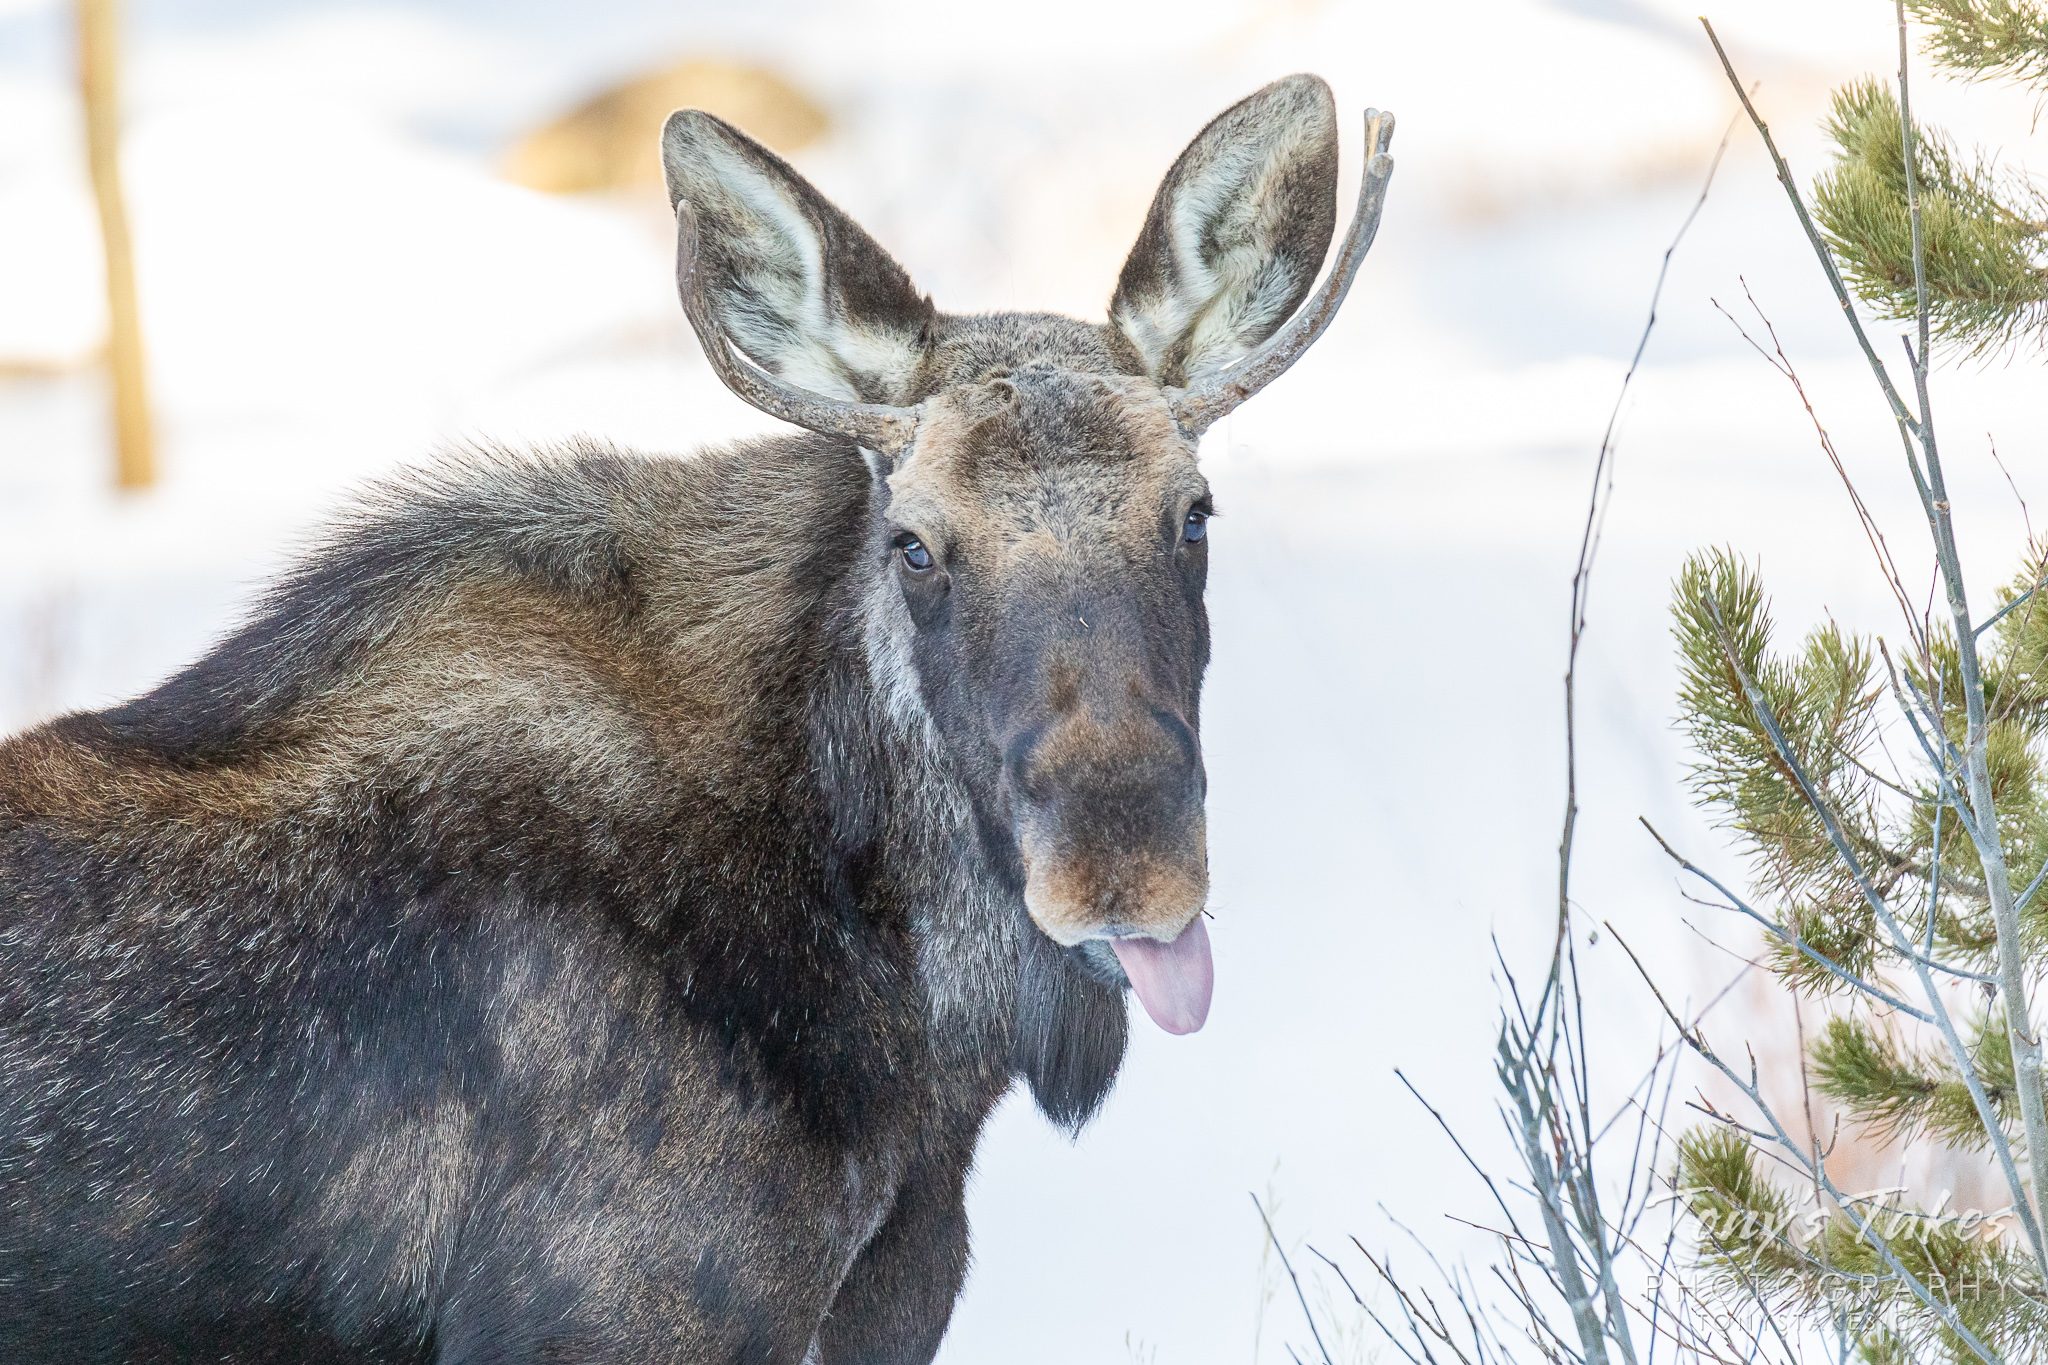 “And this is what I think of your #MooseMonday”